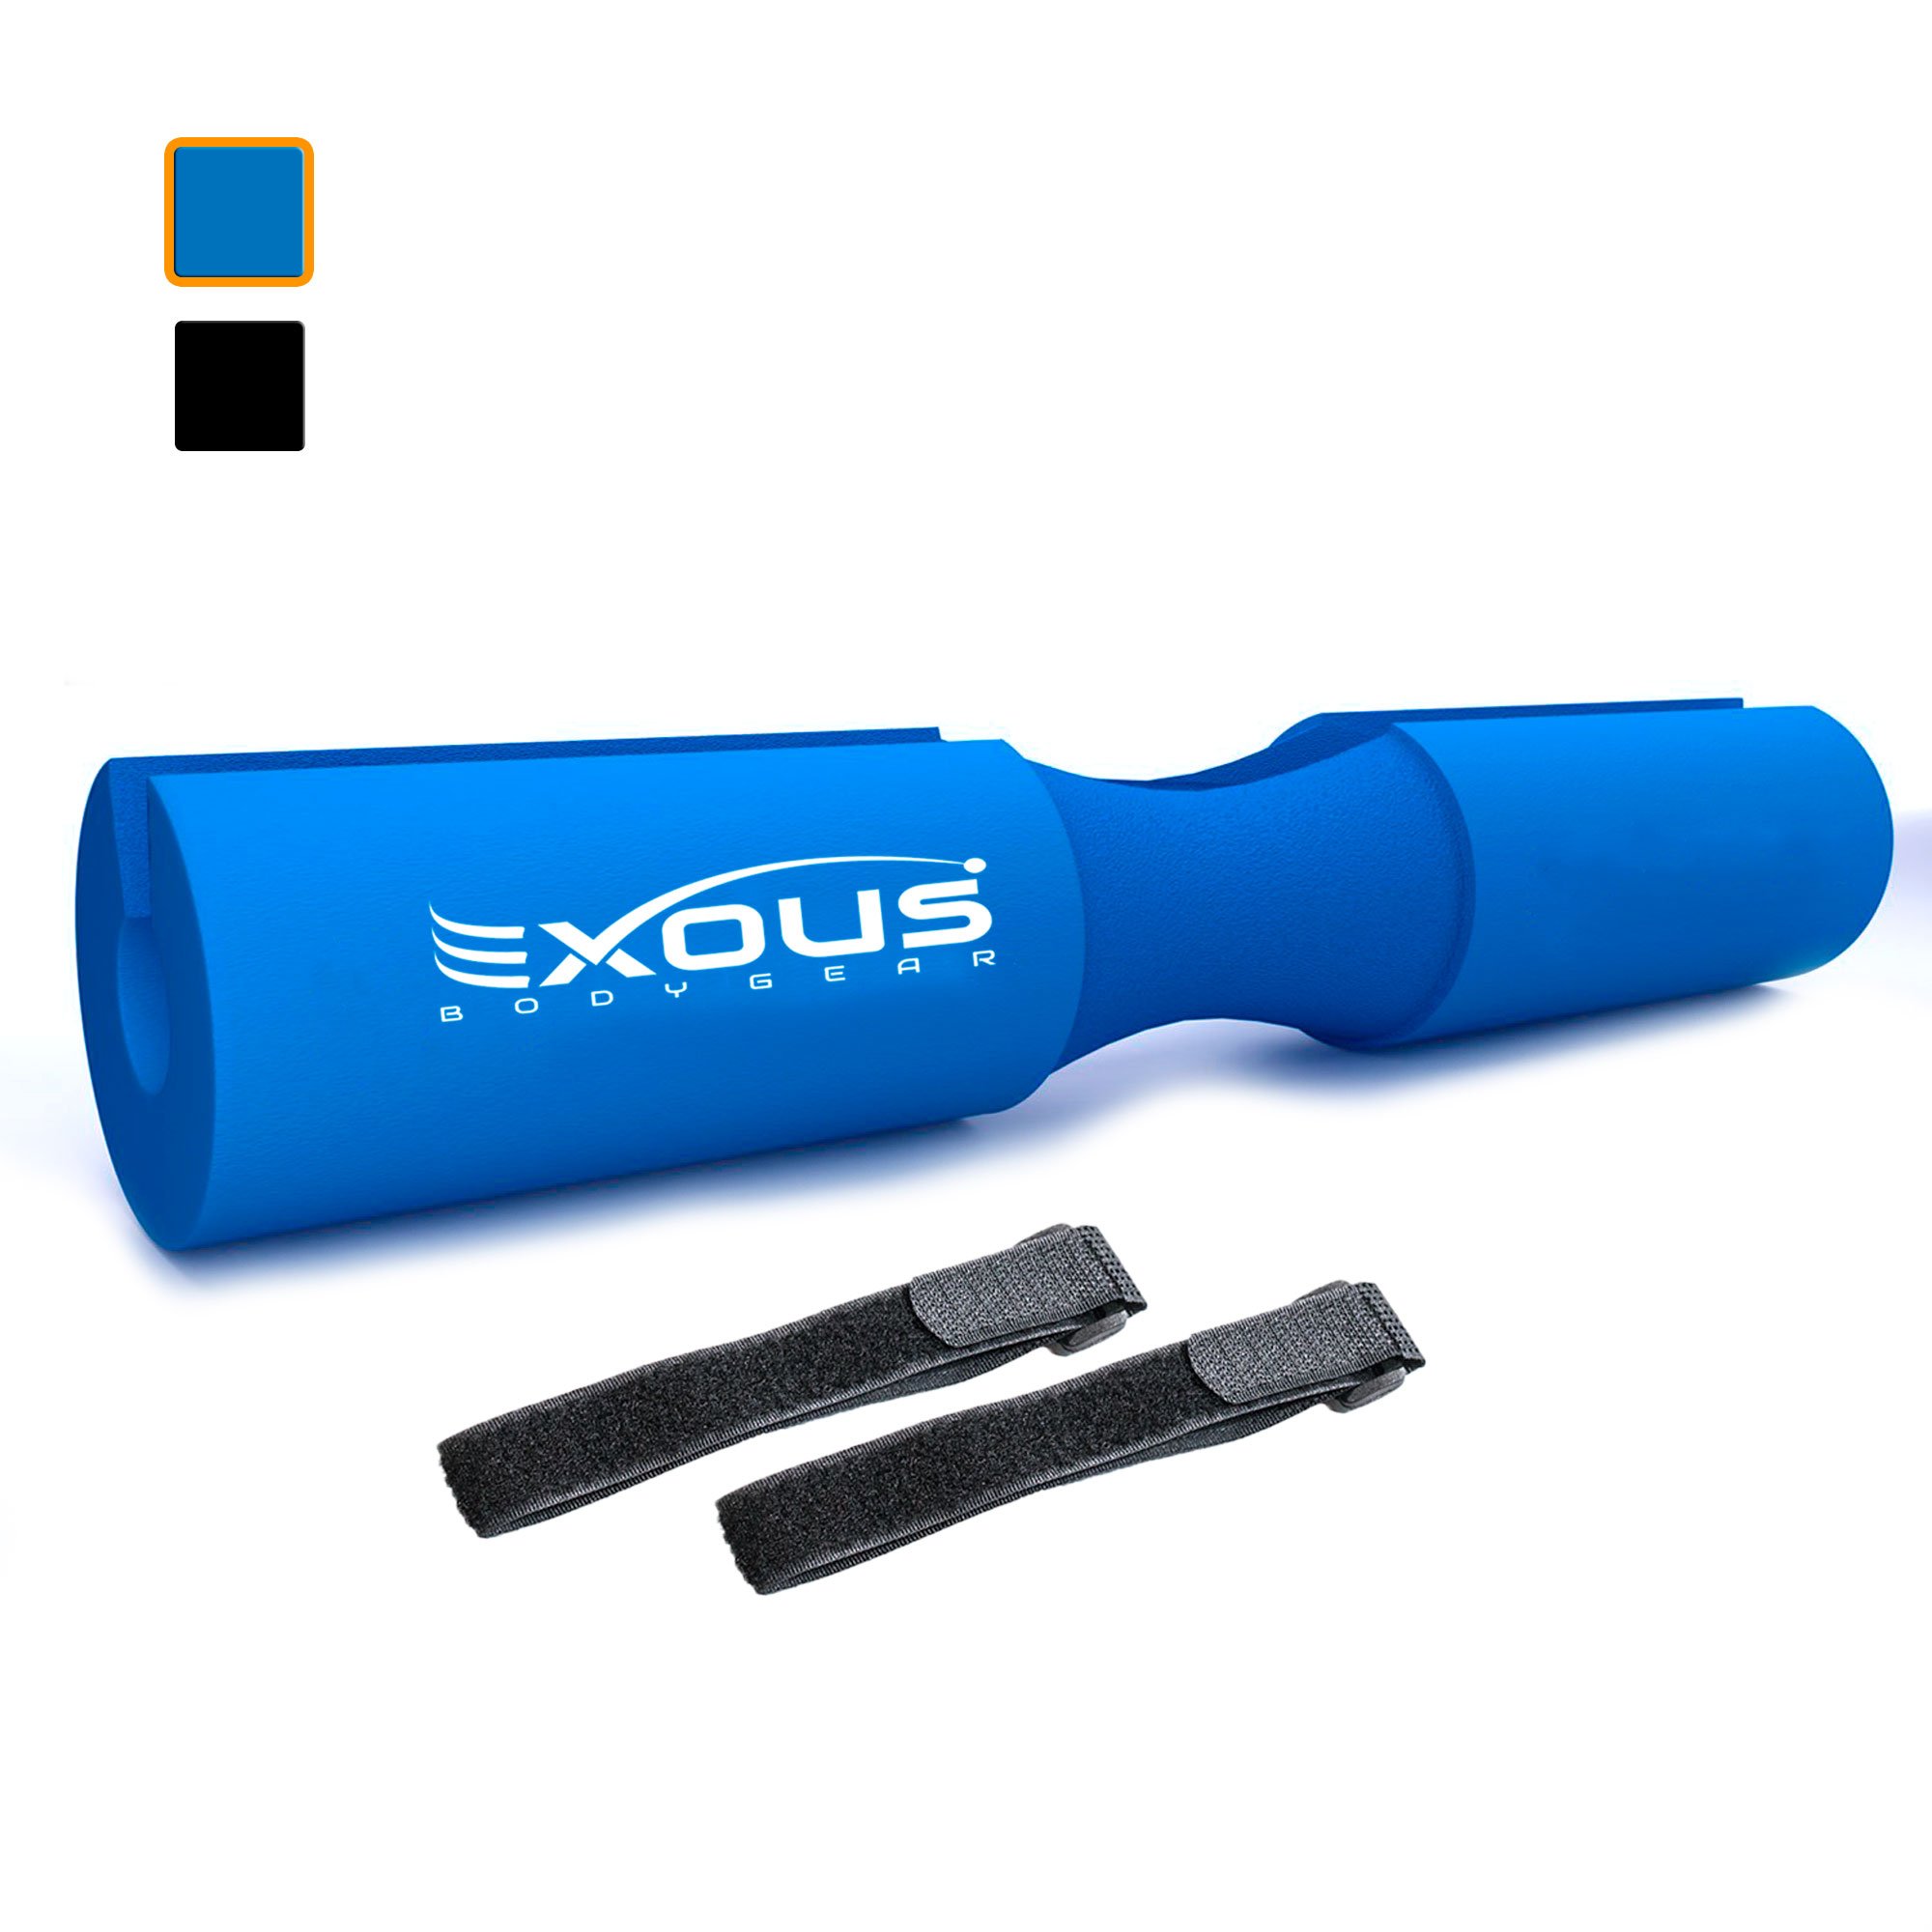 Exous Bodygear Pad for Barbells Best Pads that have Velcro Fasteners